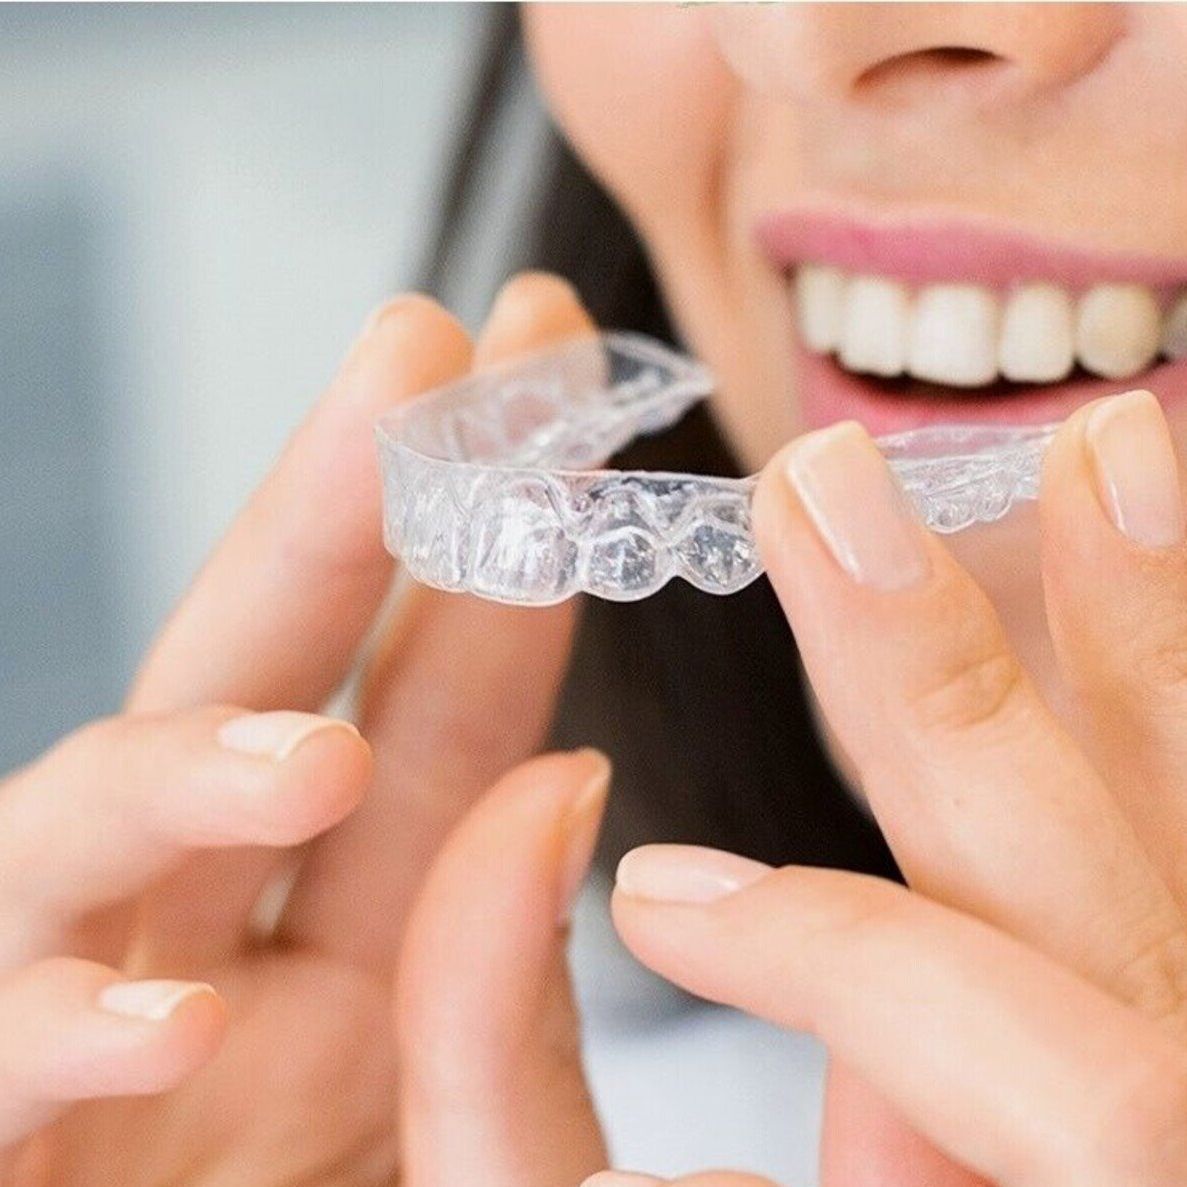 closeup image of a woman putting an aligner in